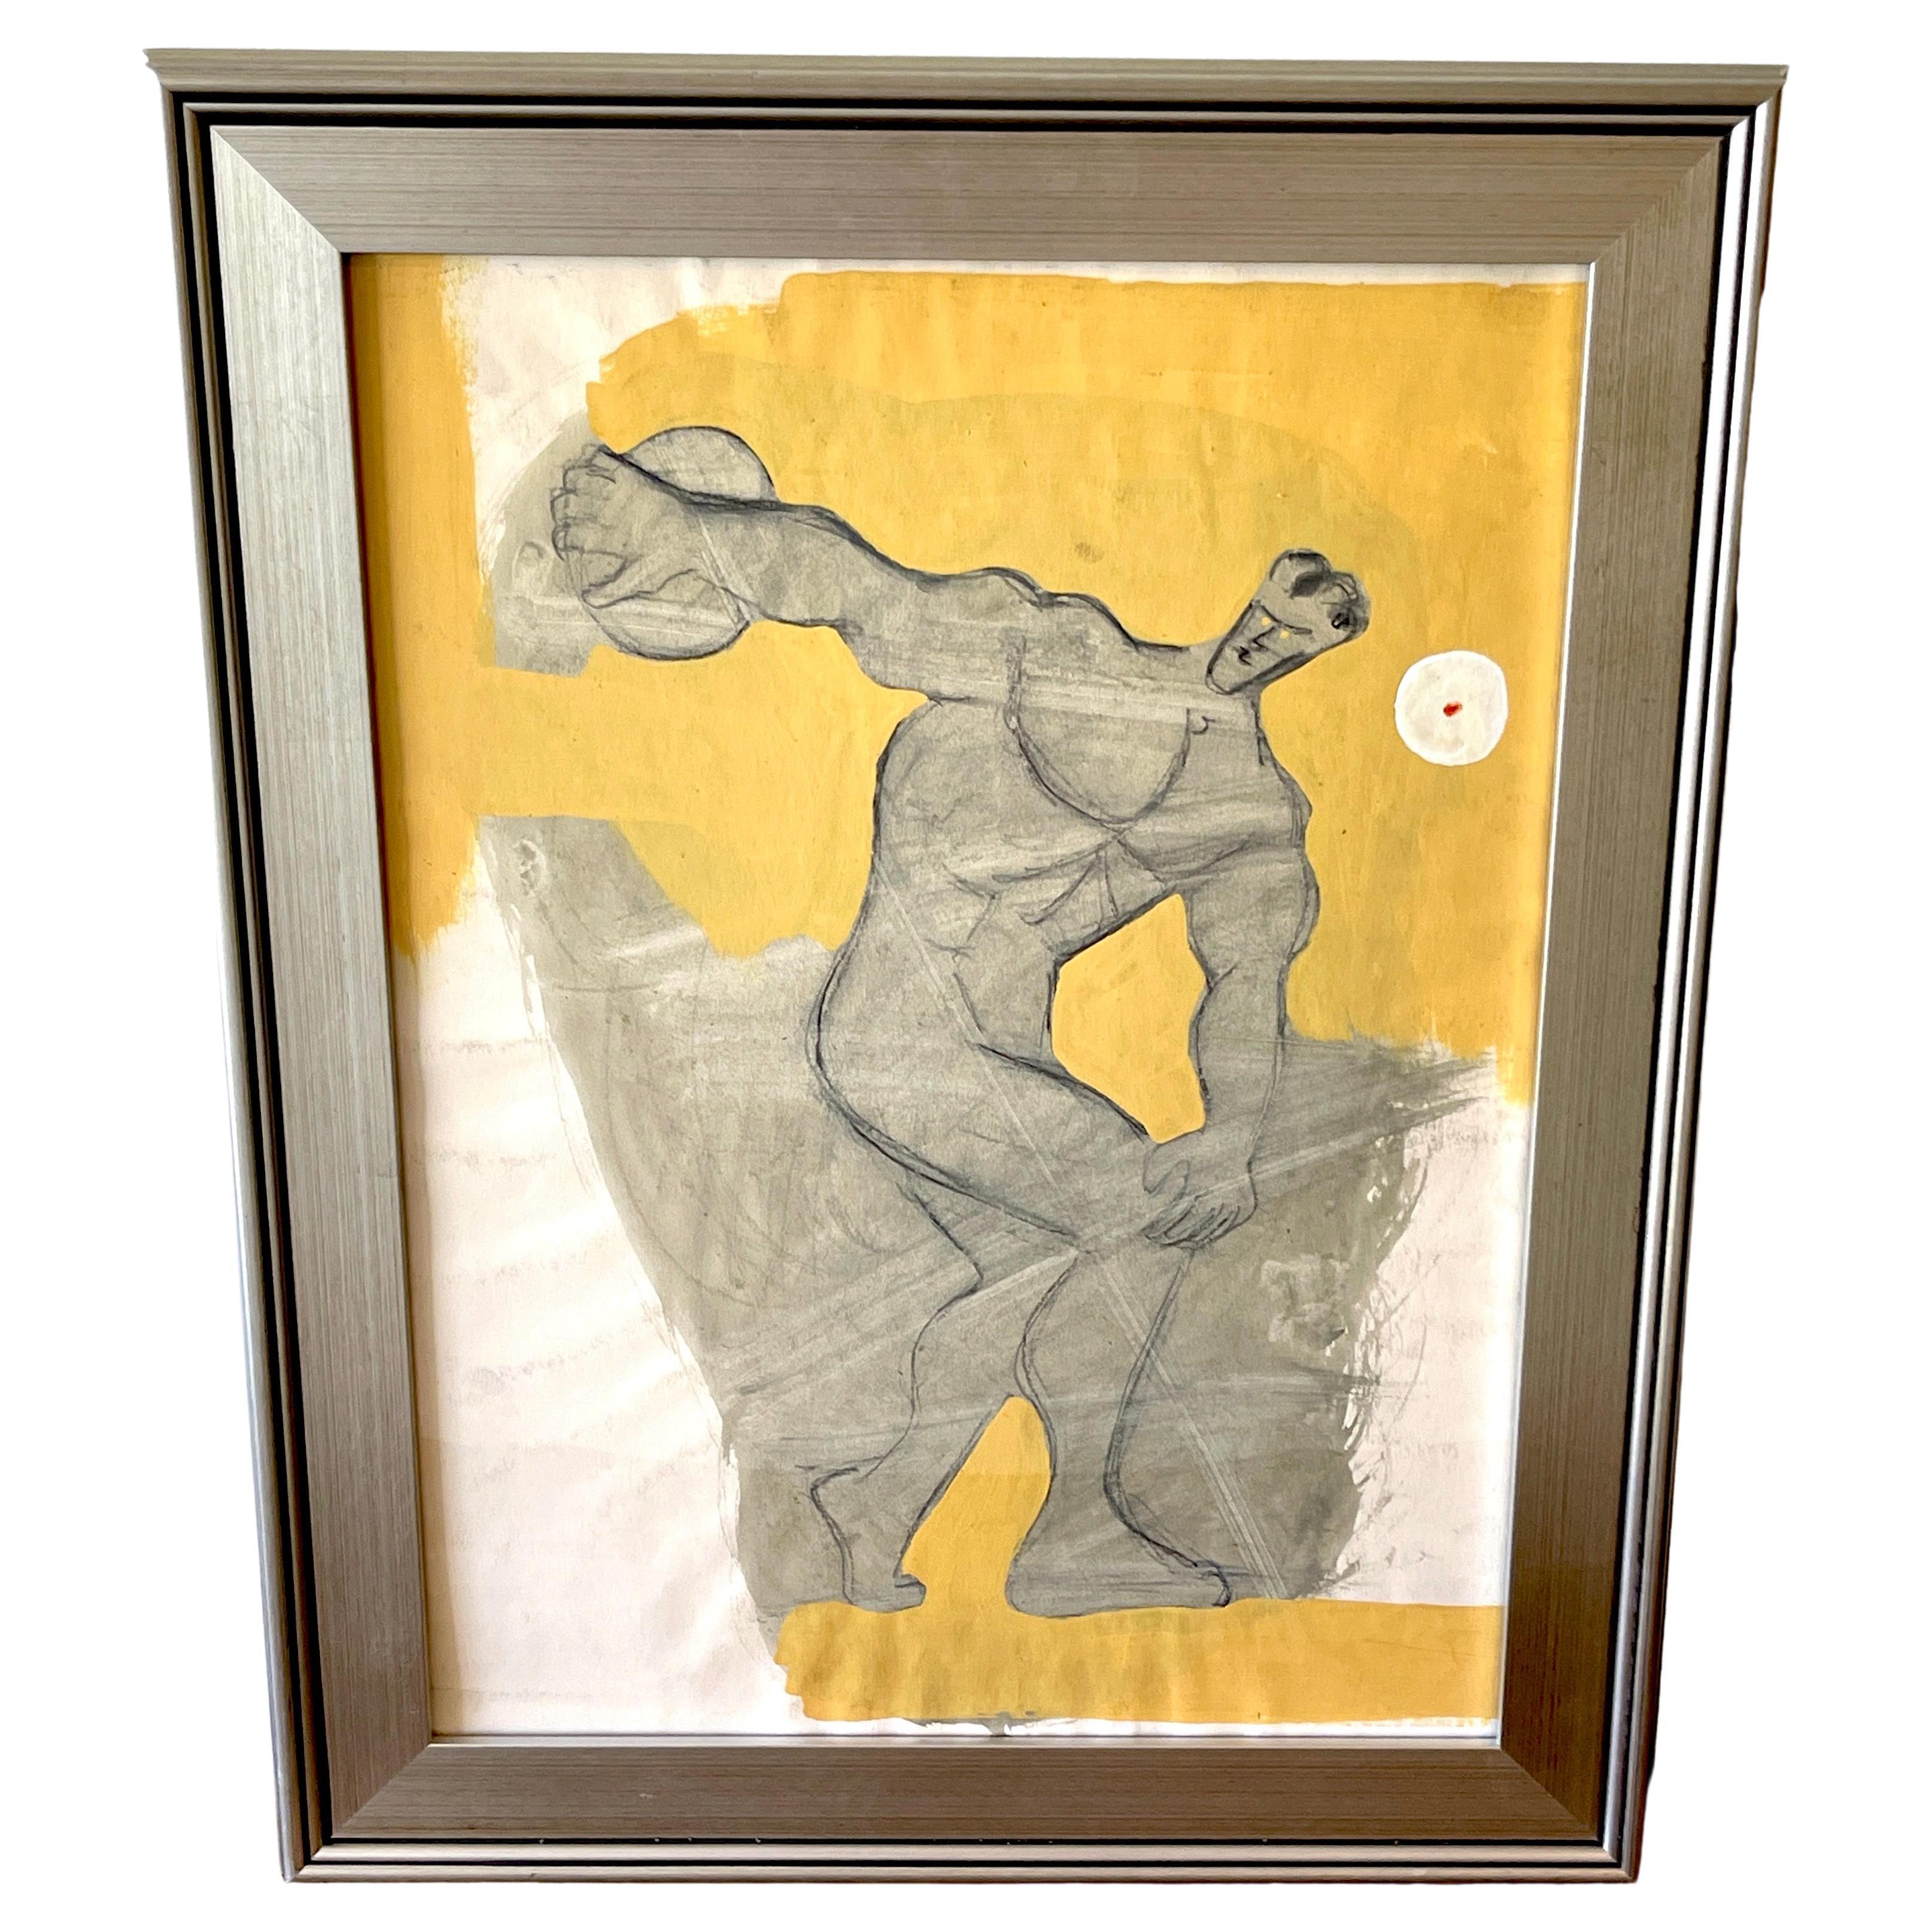 'The Discobolus' Oil/Mixed Media on Paper, 1960s by Douglas D. Peden For Sale